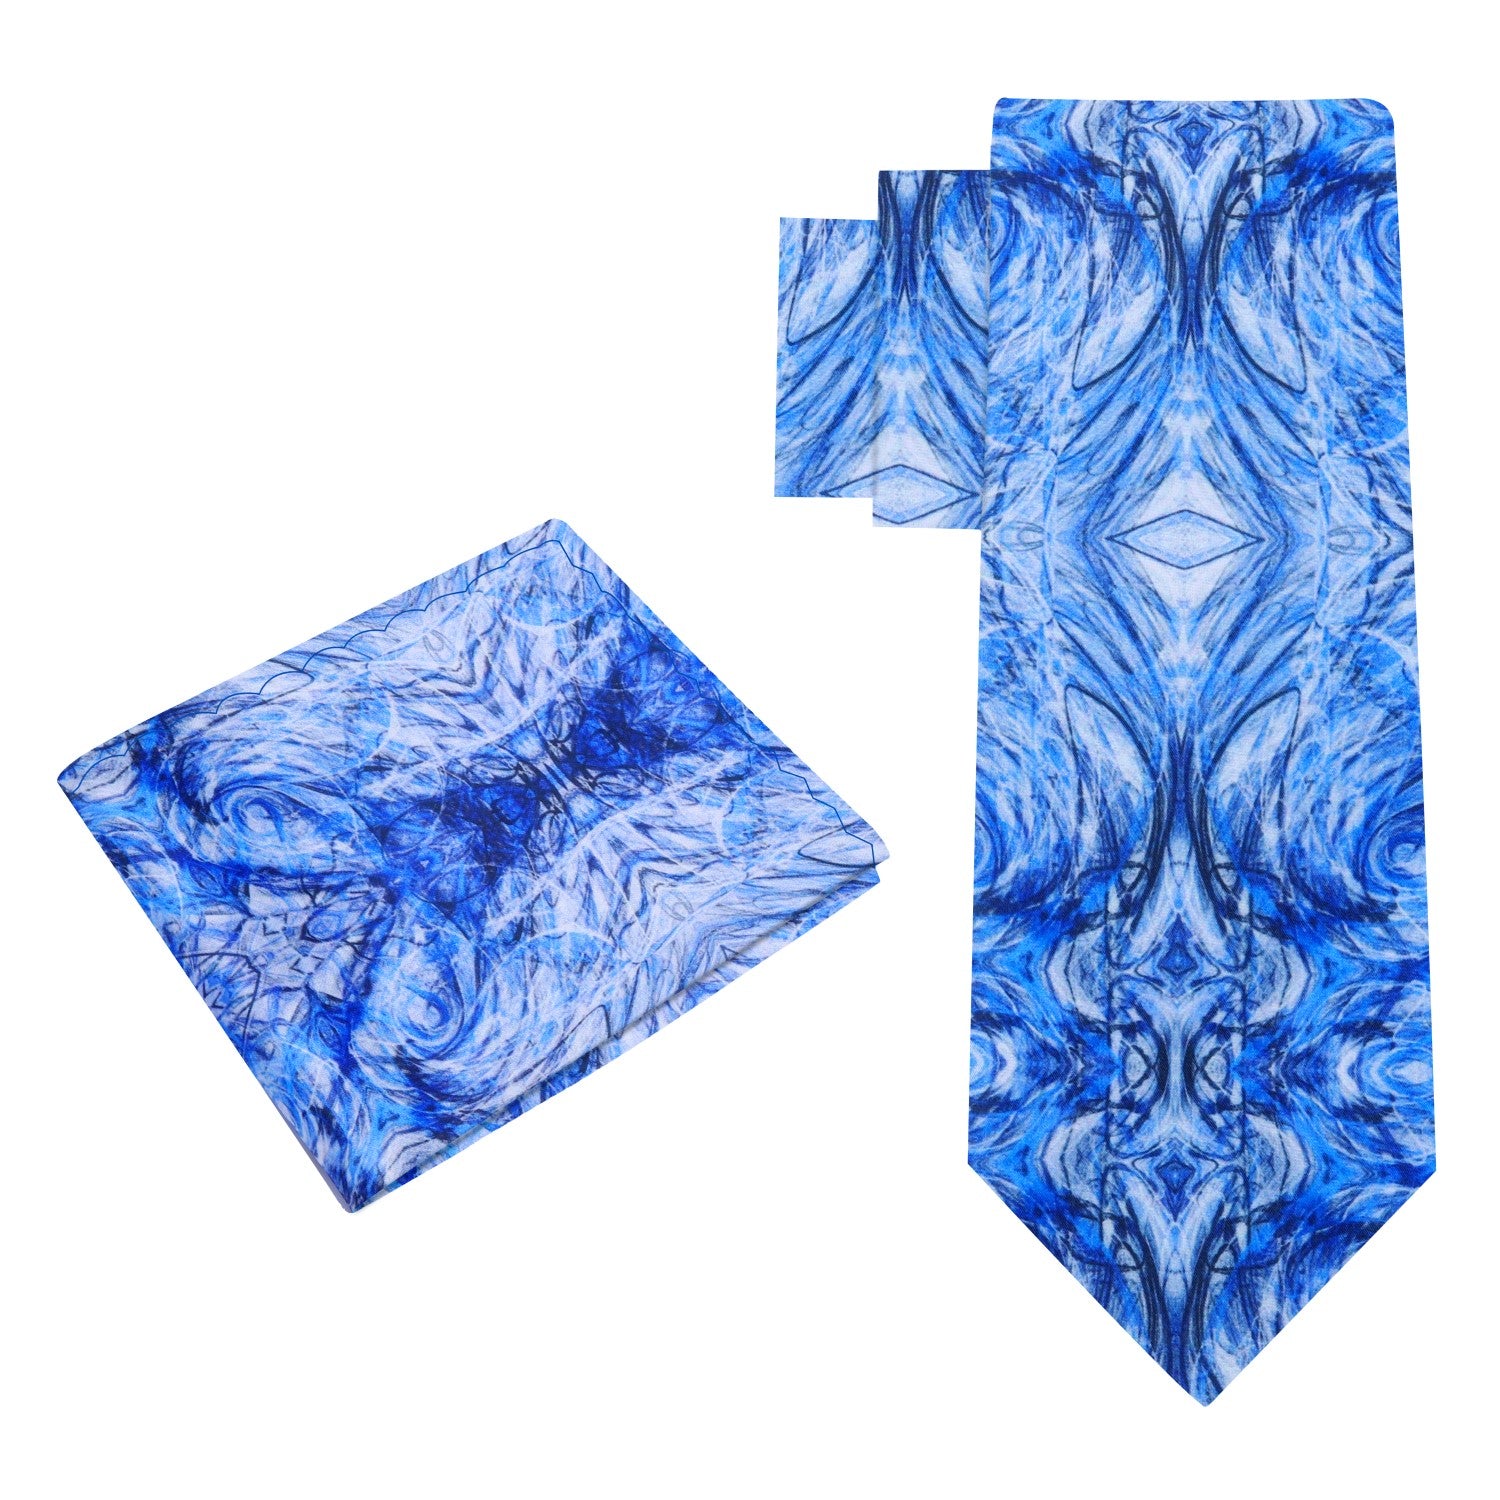 Alt: White Blue Abstract Tie and Pocket Square||White, Blue